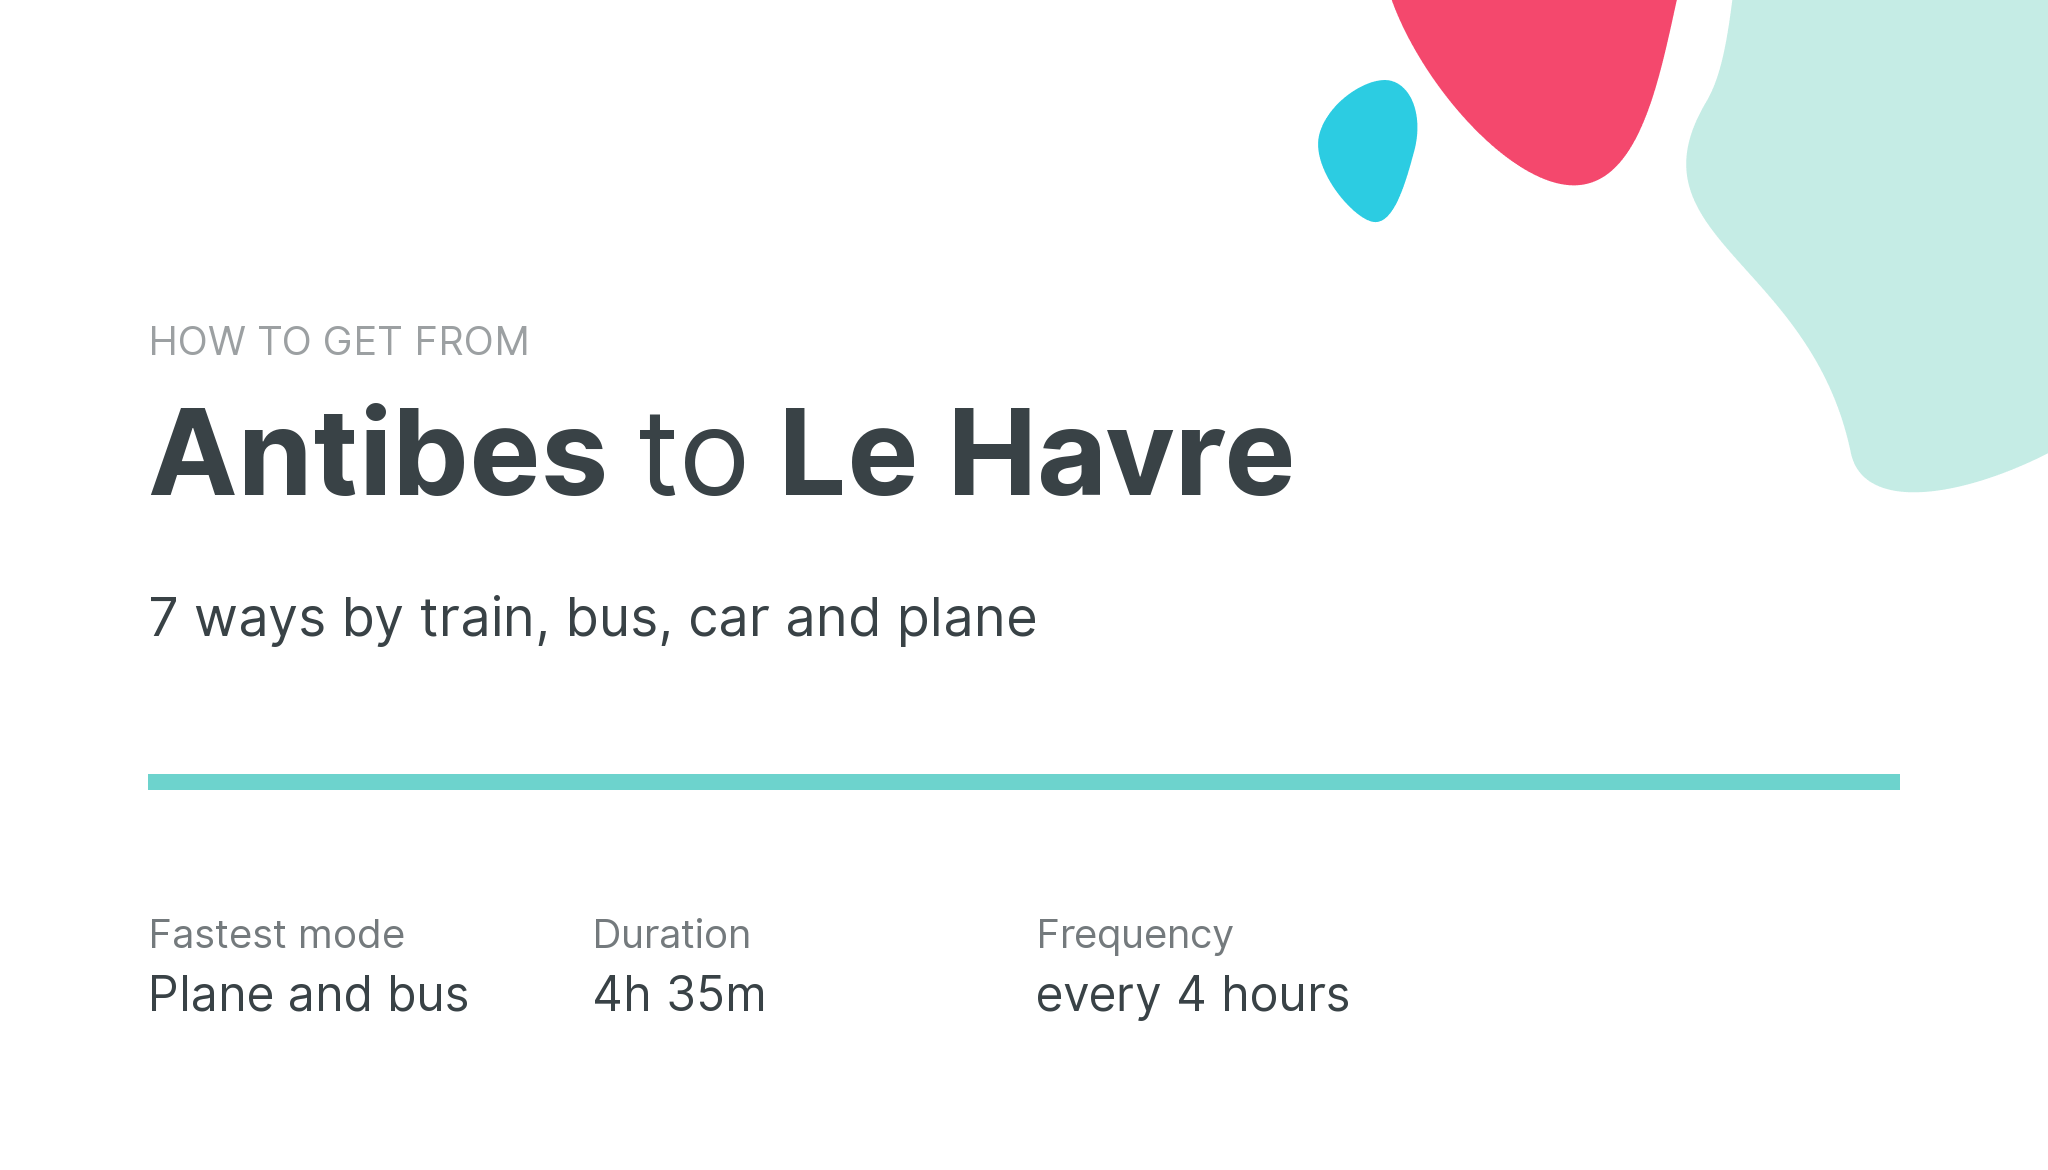 How do I get from Antibes to Le Havre